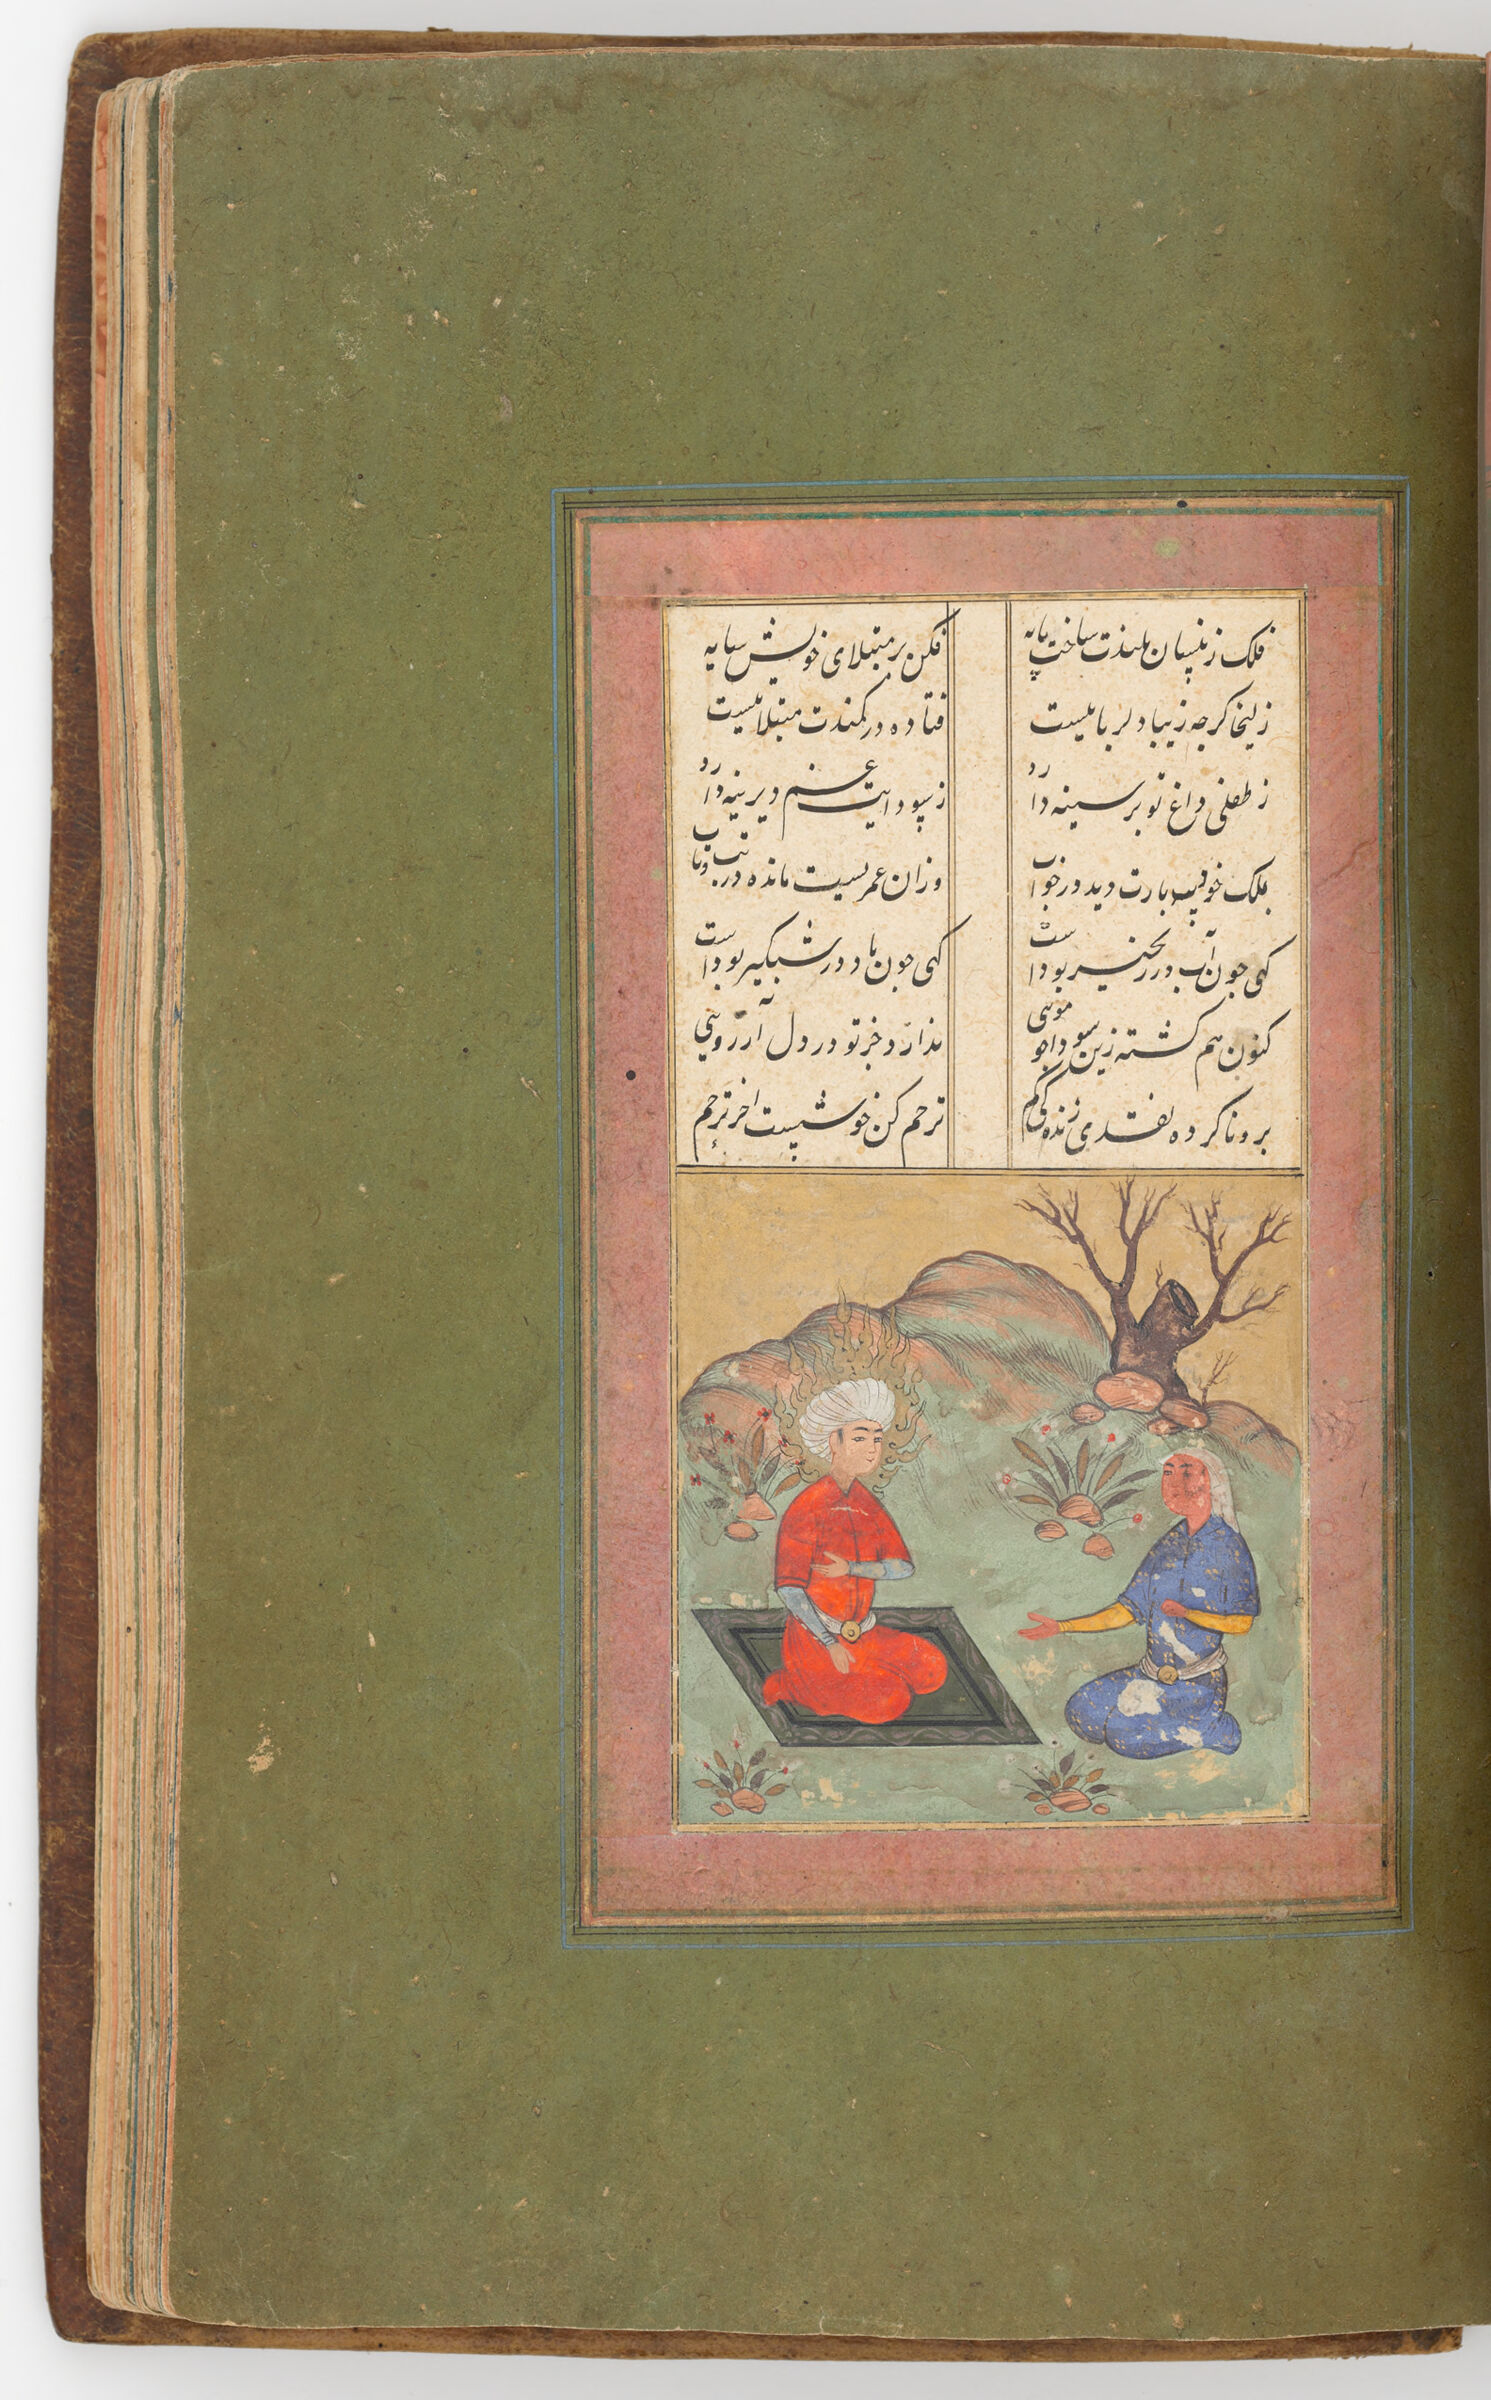 Zulaykha Begs Yusuf For His Love (Painting Recto; Text Verso Of Folio 68); Illustrated Folio From A Manuscript Of Yusuf And Zulaykha By Nizami